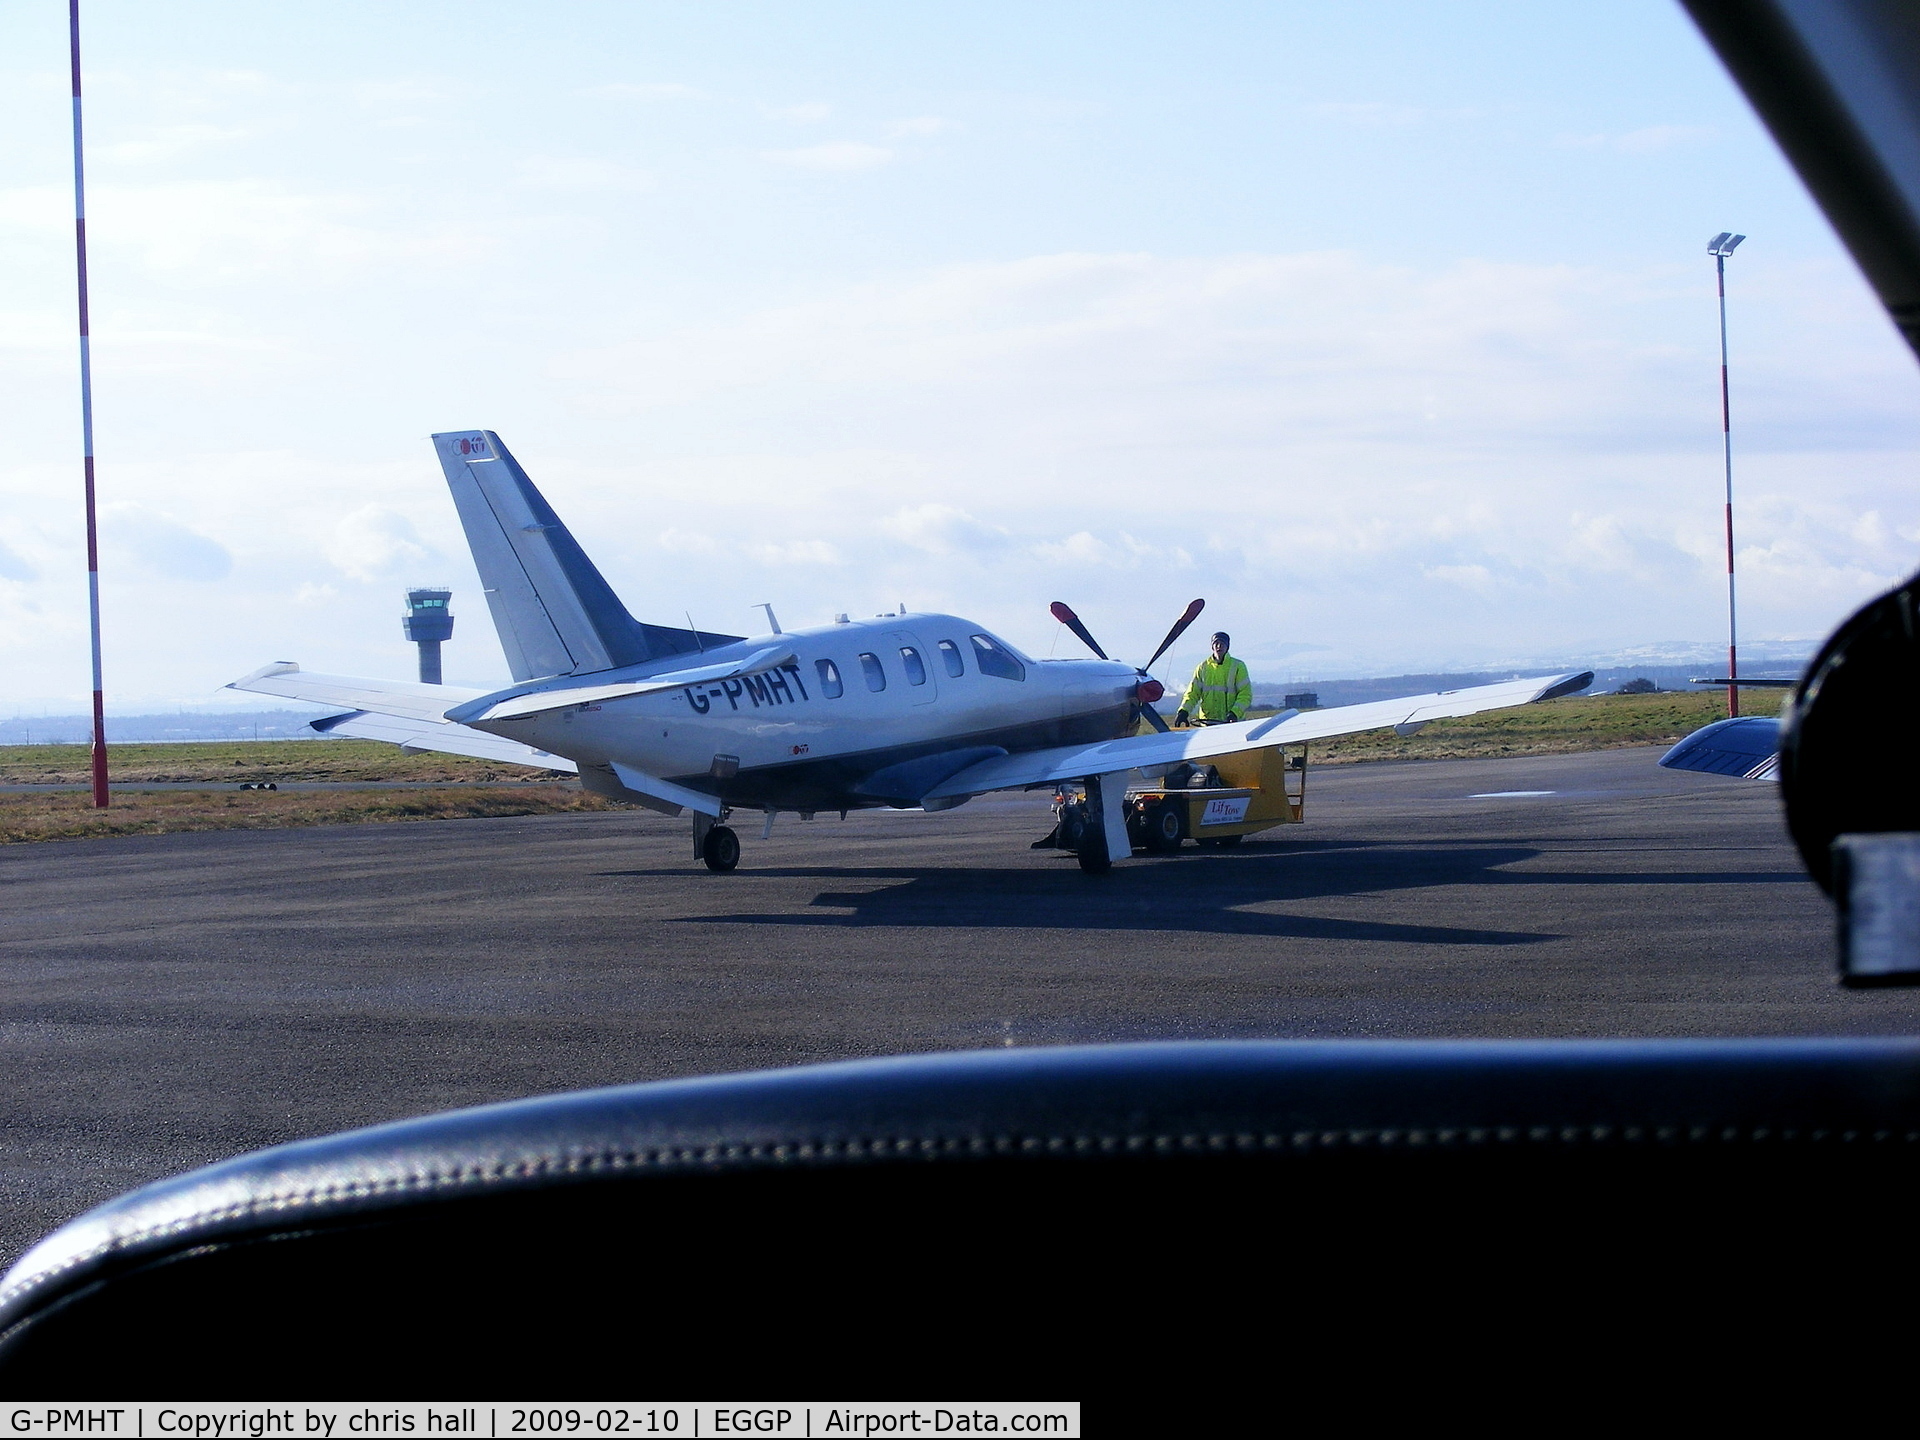 G-PMHT, 2008 Socata TBM-700N C/N 440, on the apron at Liverpool, taken from G-BNJT